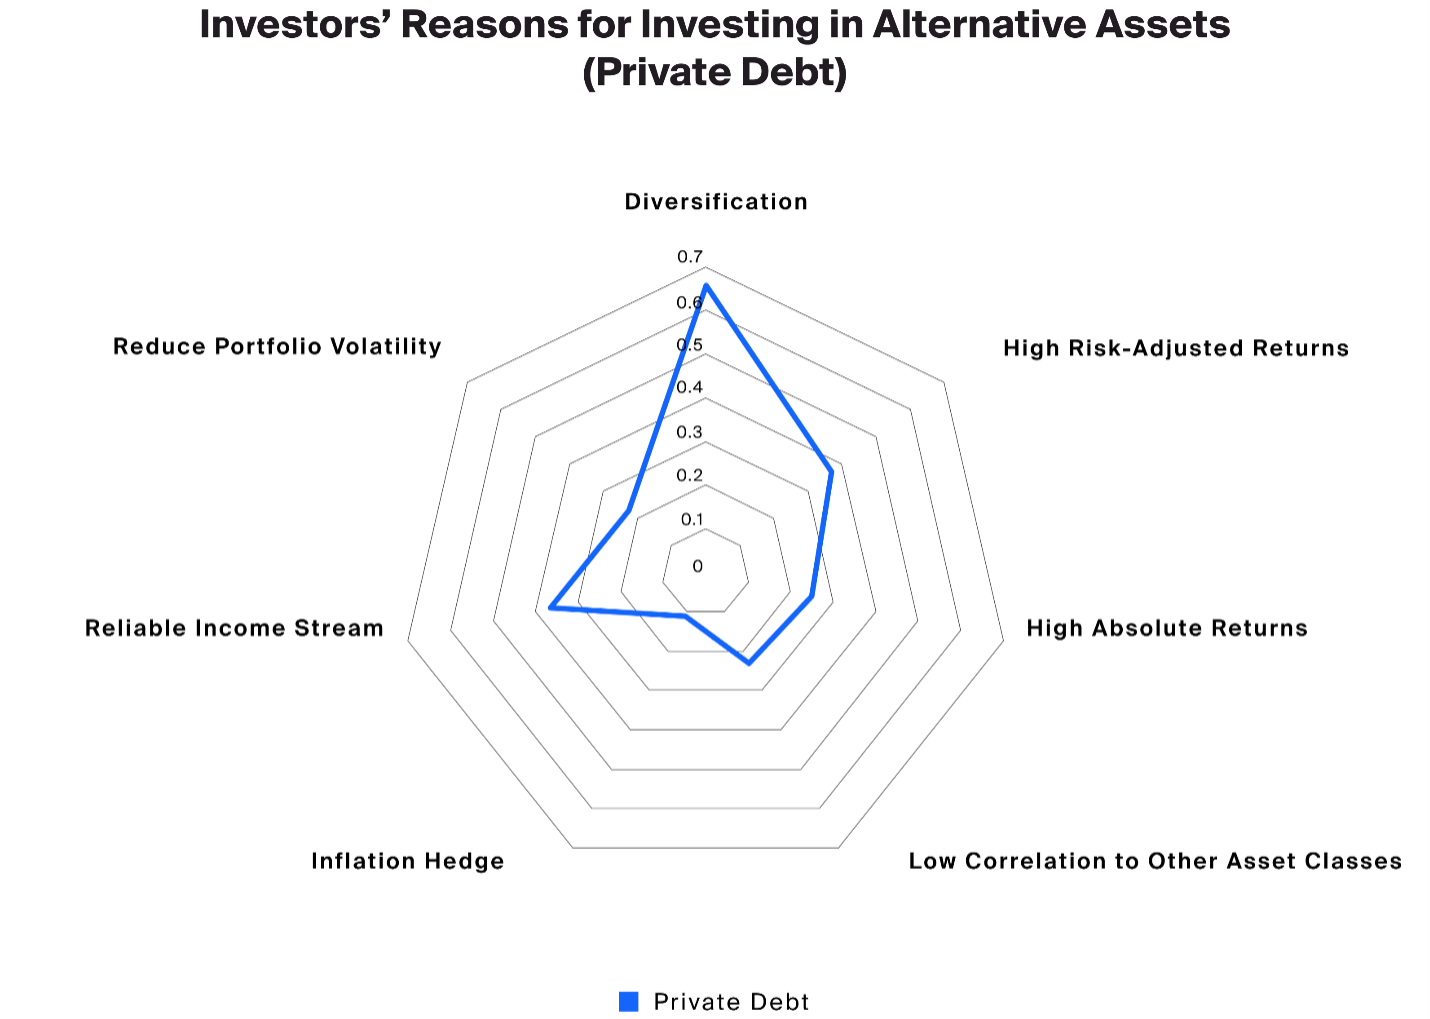 Exhibit 2: Investors tend to allocate to private debt seeking diversification, income and better risk-adjusted returns